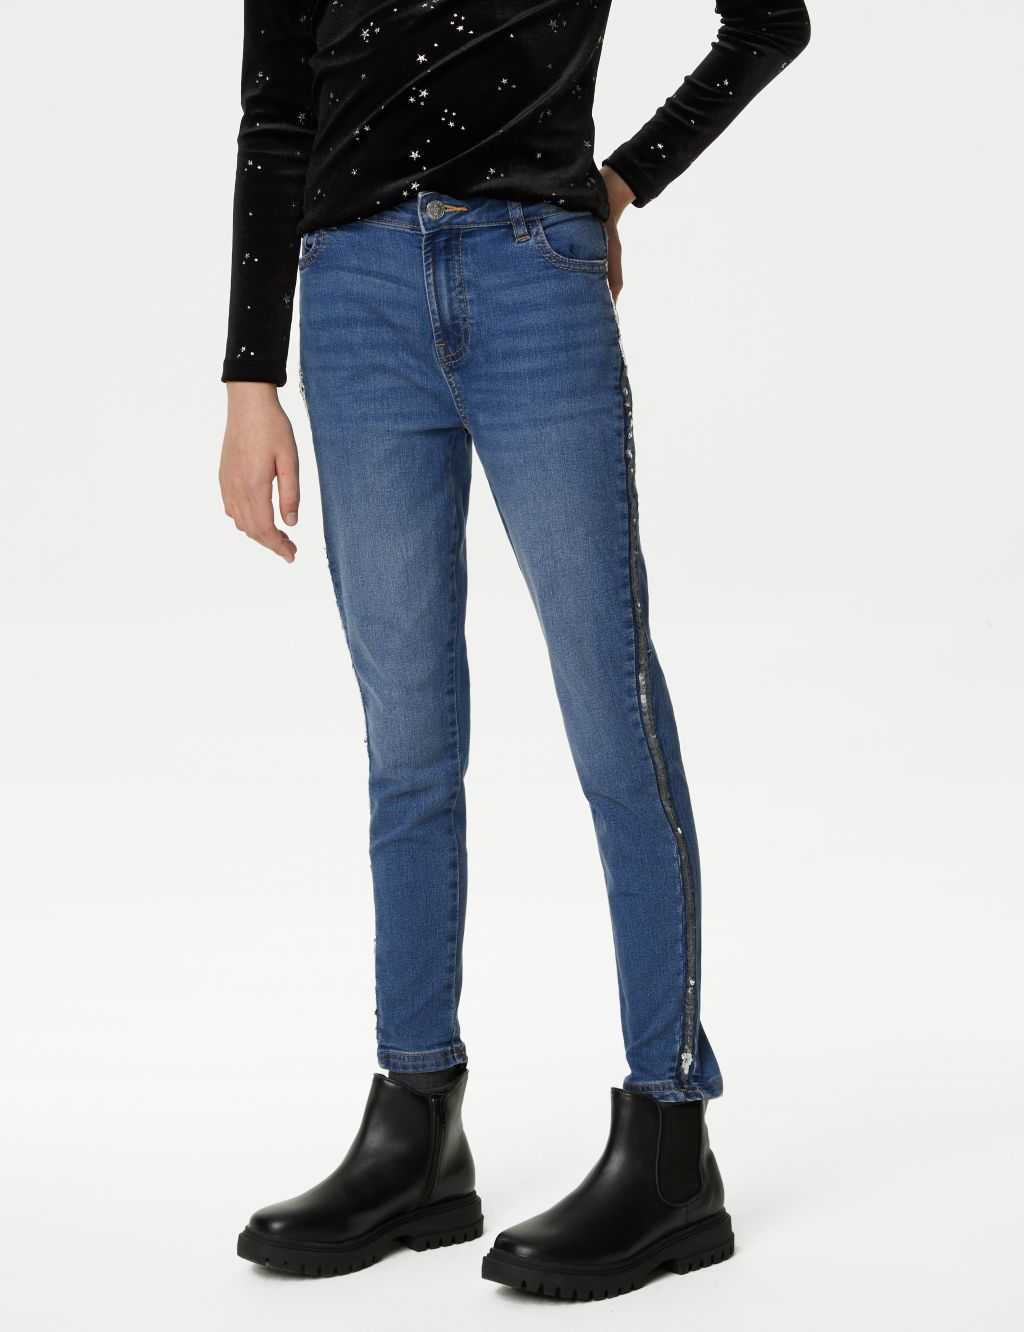 Skinny Cotton Rich Sequin Jeans (6-16 Yrs) image 4